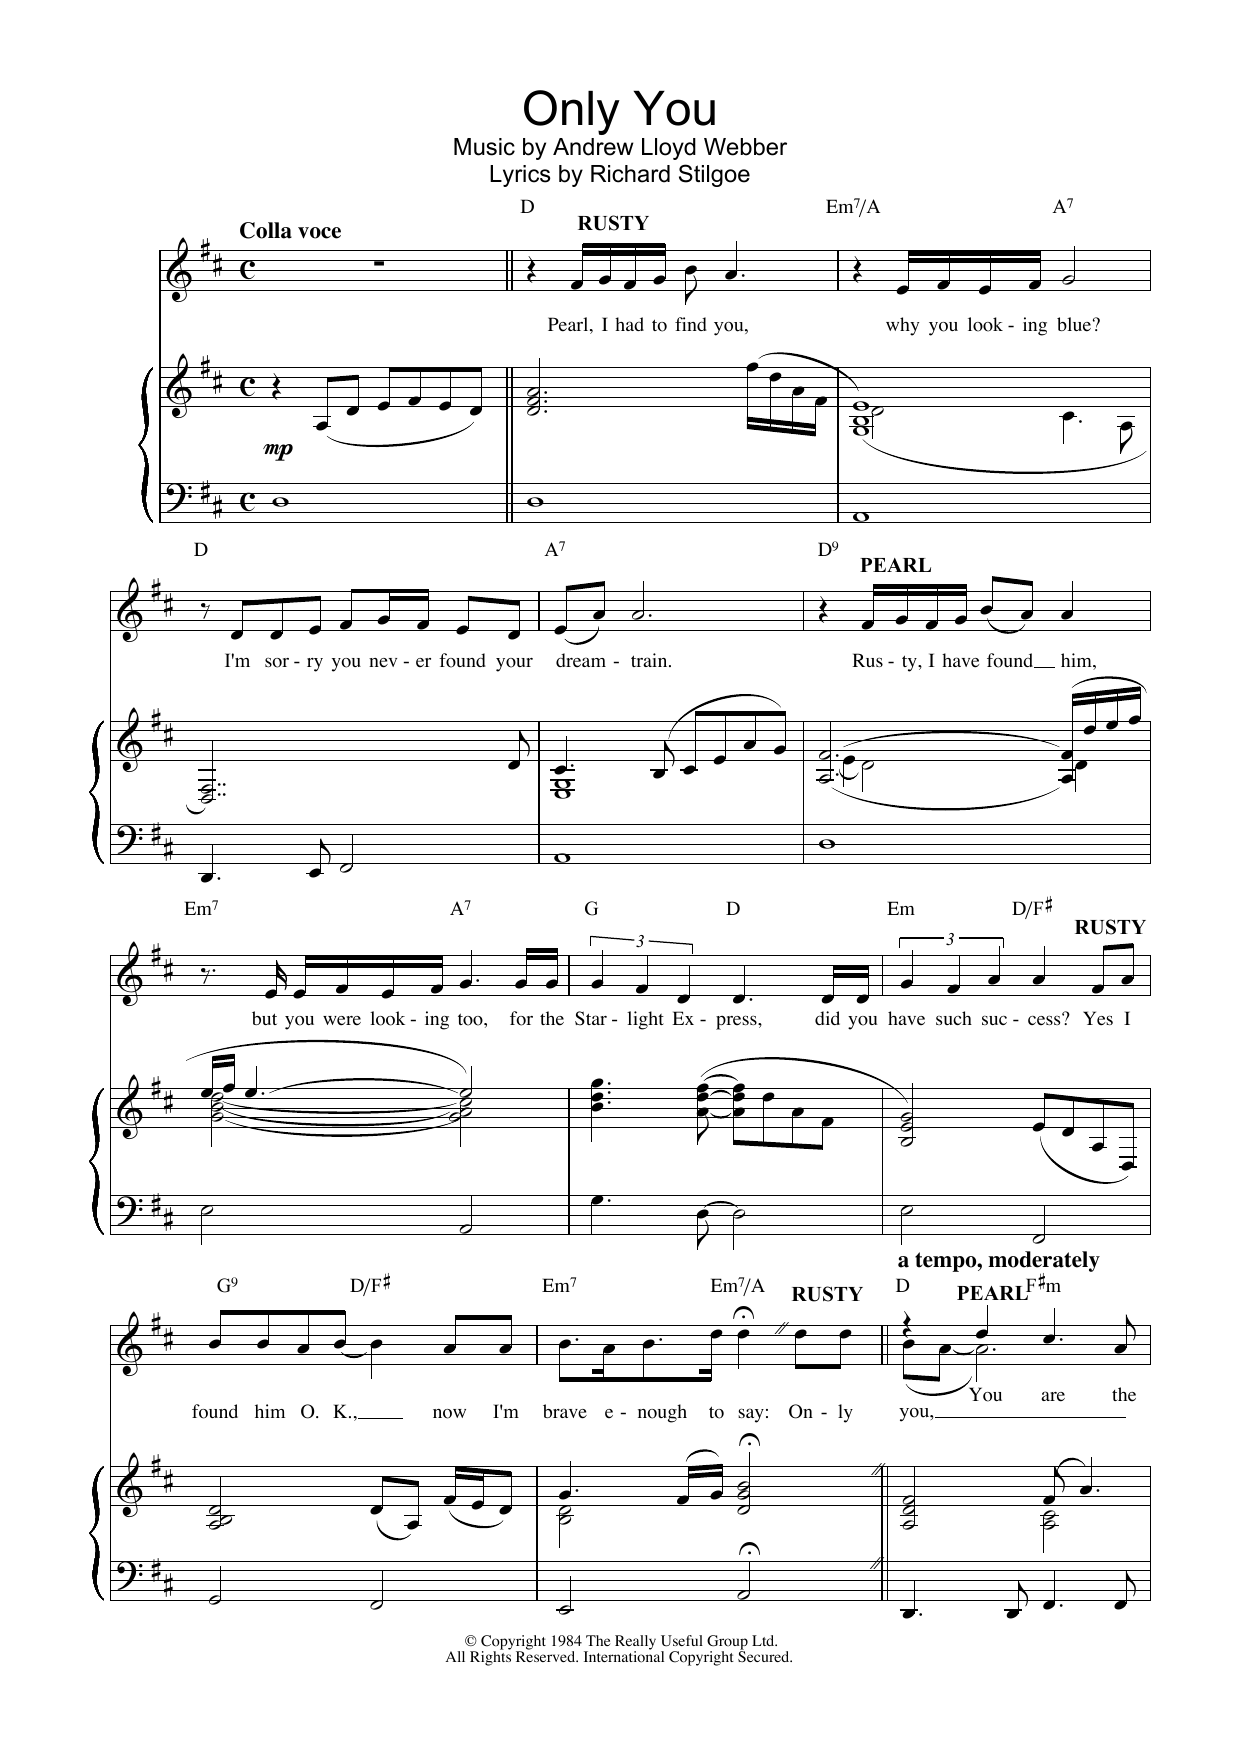 Andrew Lloyd Webber Only You (from Starlight Express) sheet music notes and chords. Download Printable PDF.